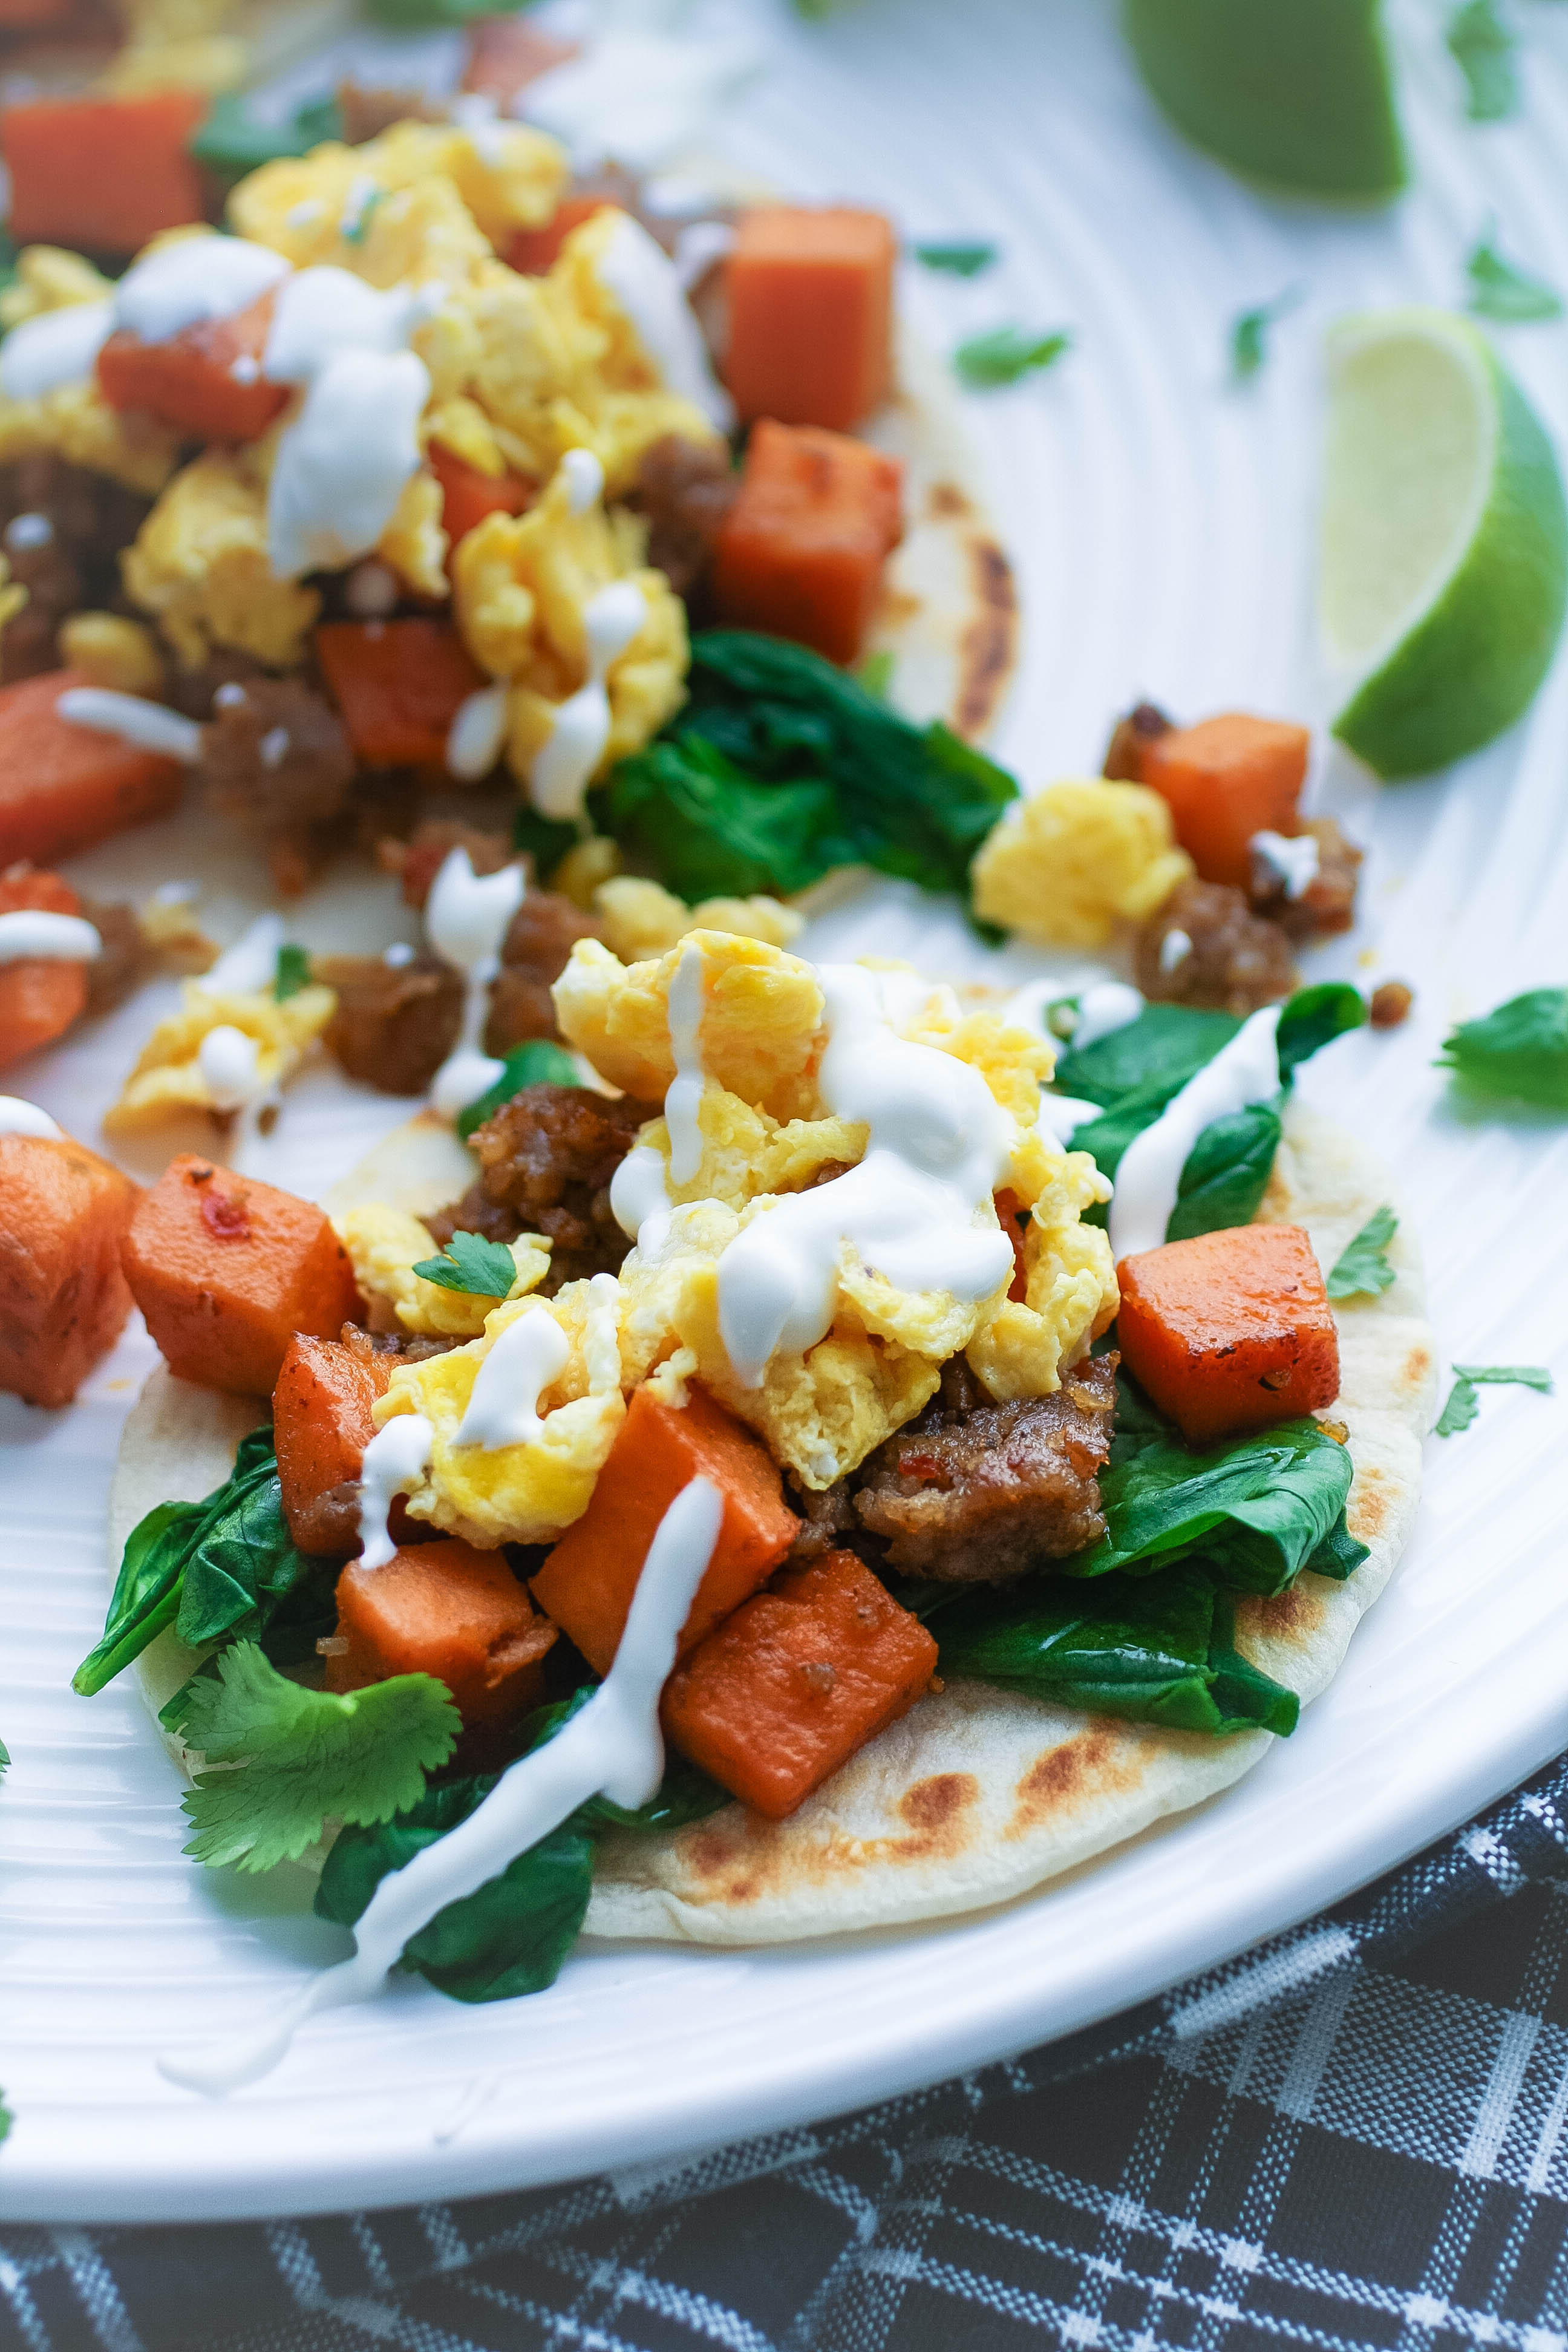 Breakfast Tacos with Sweet Potatoes, Sausage, Spinach, and Lime Crema are so fun to serve early in the day. Breakfast Tacos with Sweet Potatoes, Sausage, Spinach, and Lime Crema are fun for breakfast or brunch!